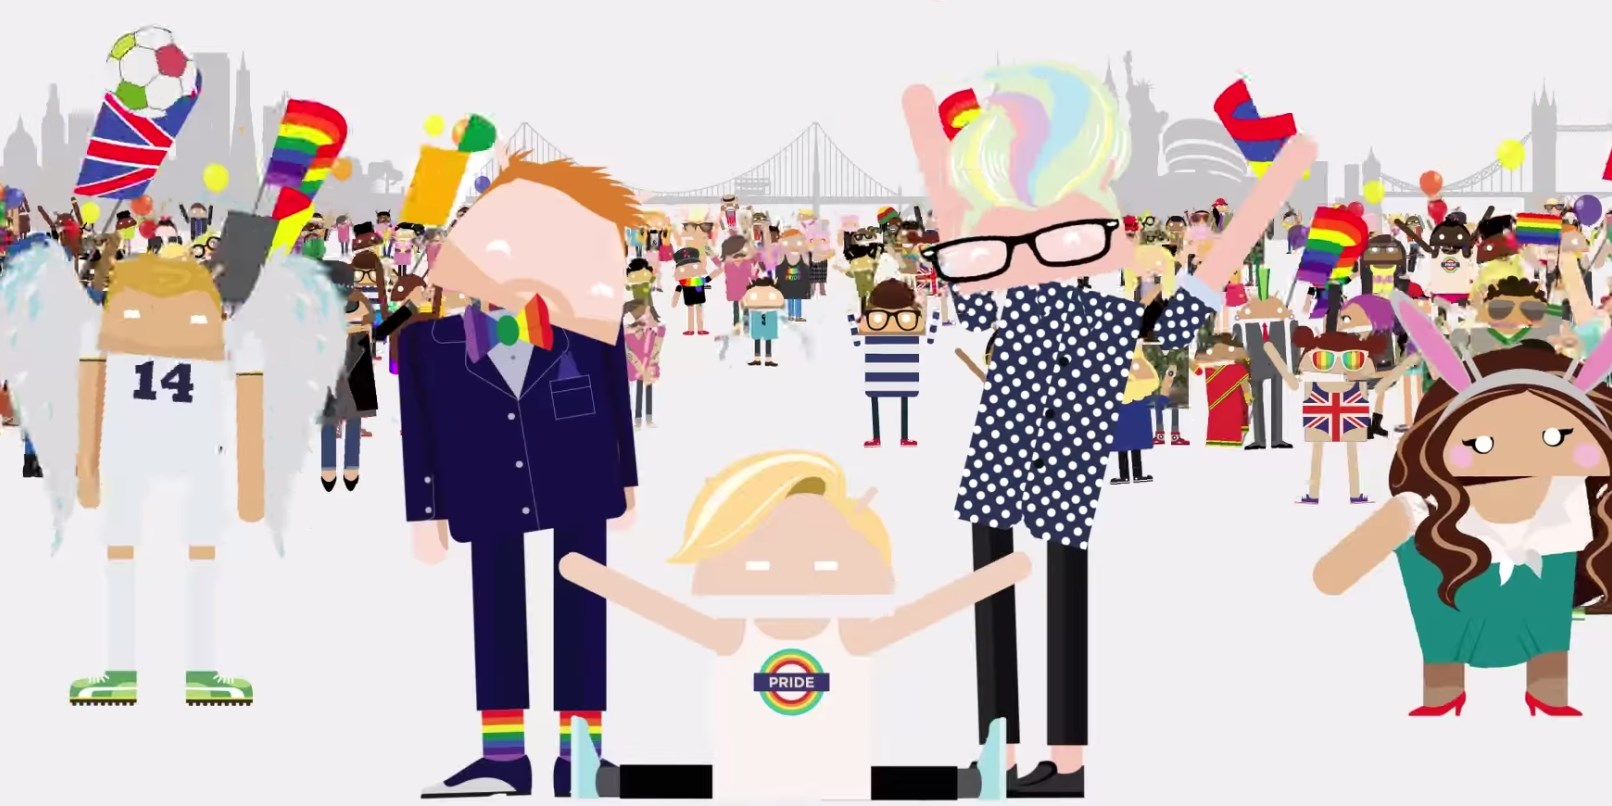 Google Celebrates Pride Weekend With A Virtual Androidify Character Parade